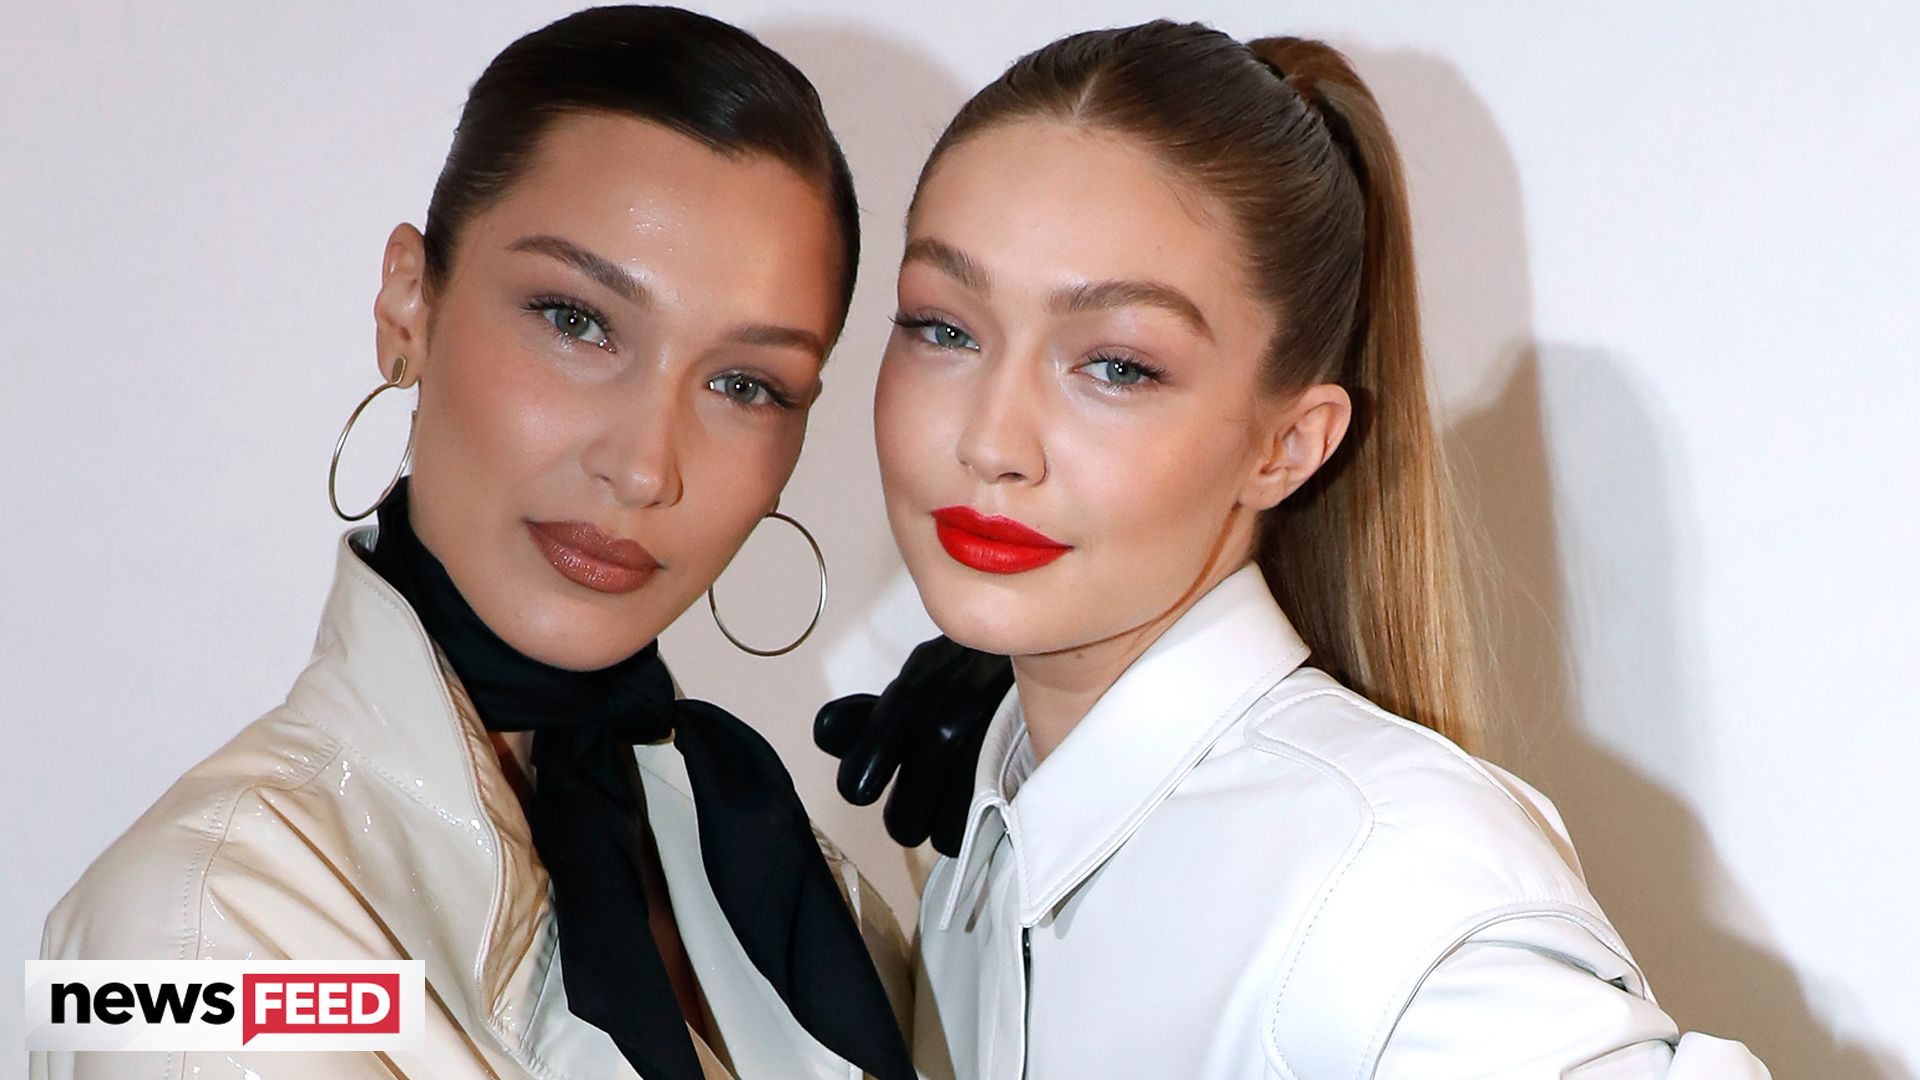 This is what Gigi Hadid packed for her trip to Aspen – see photos